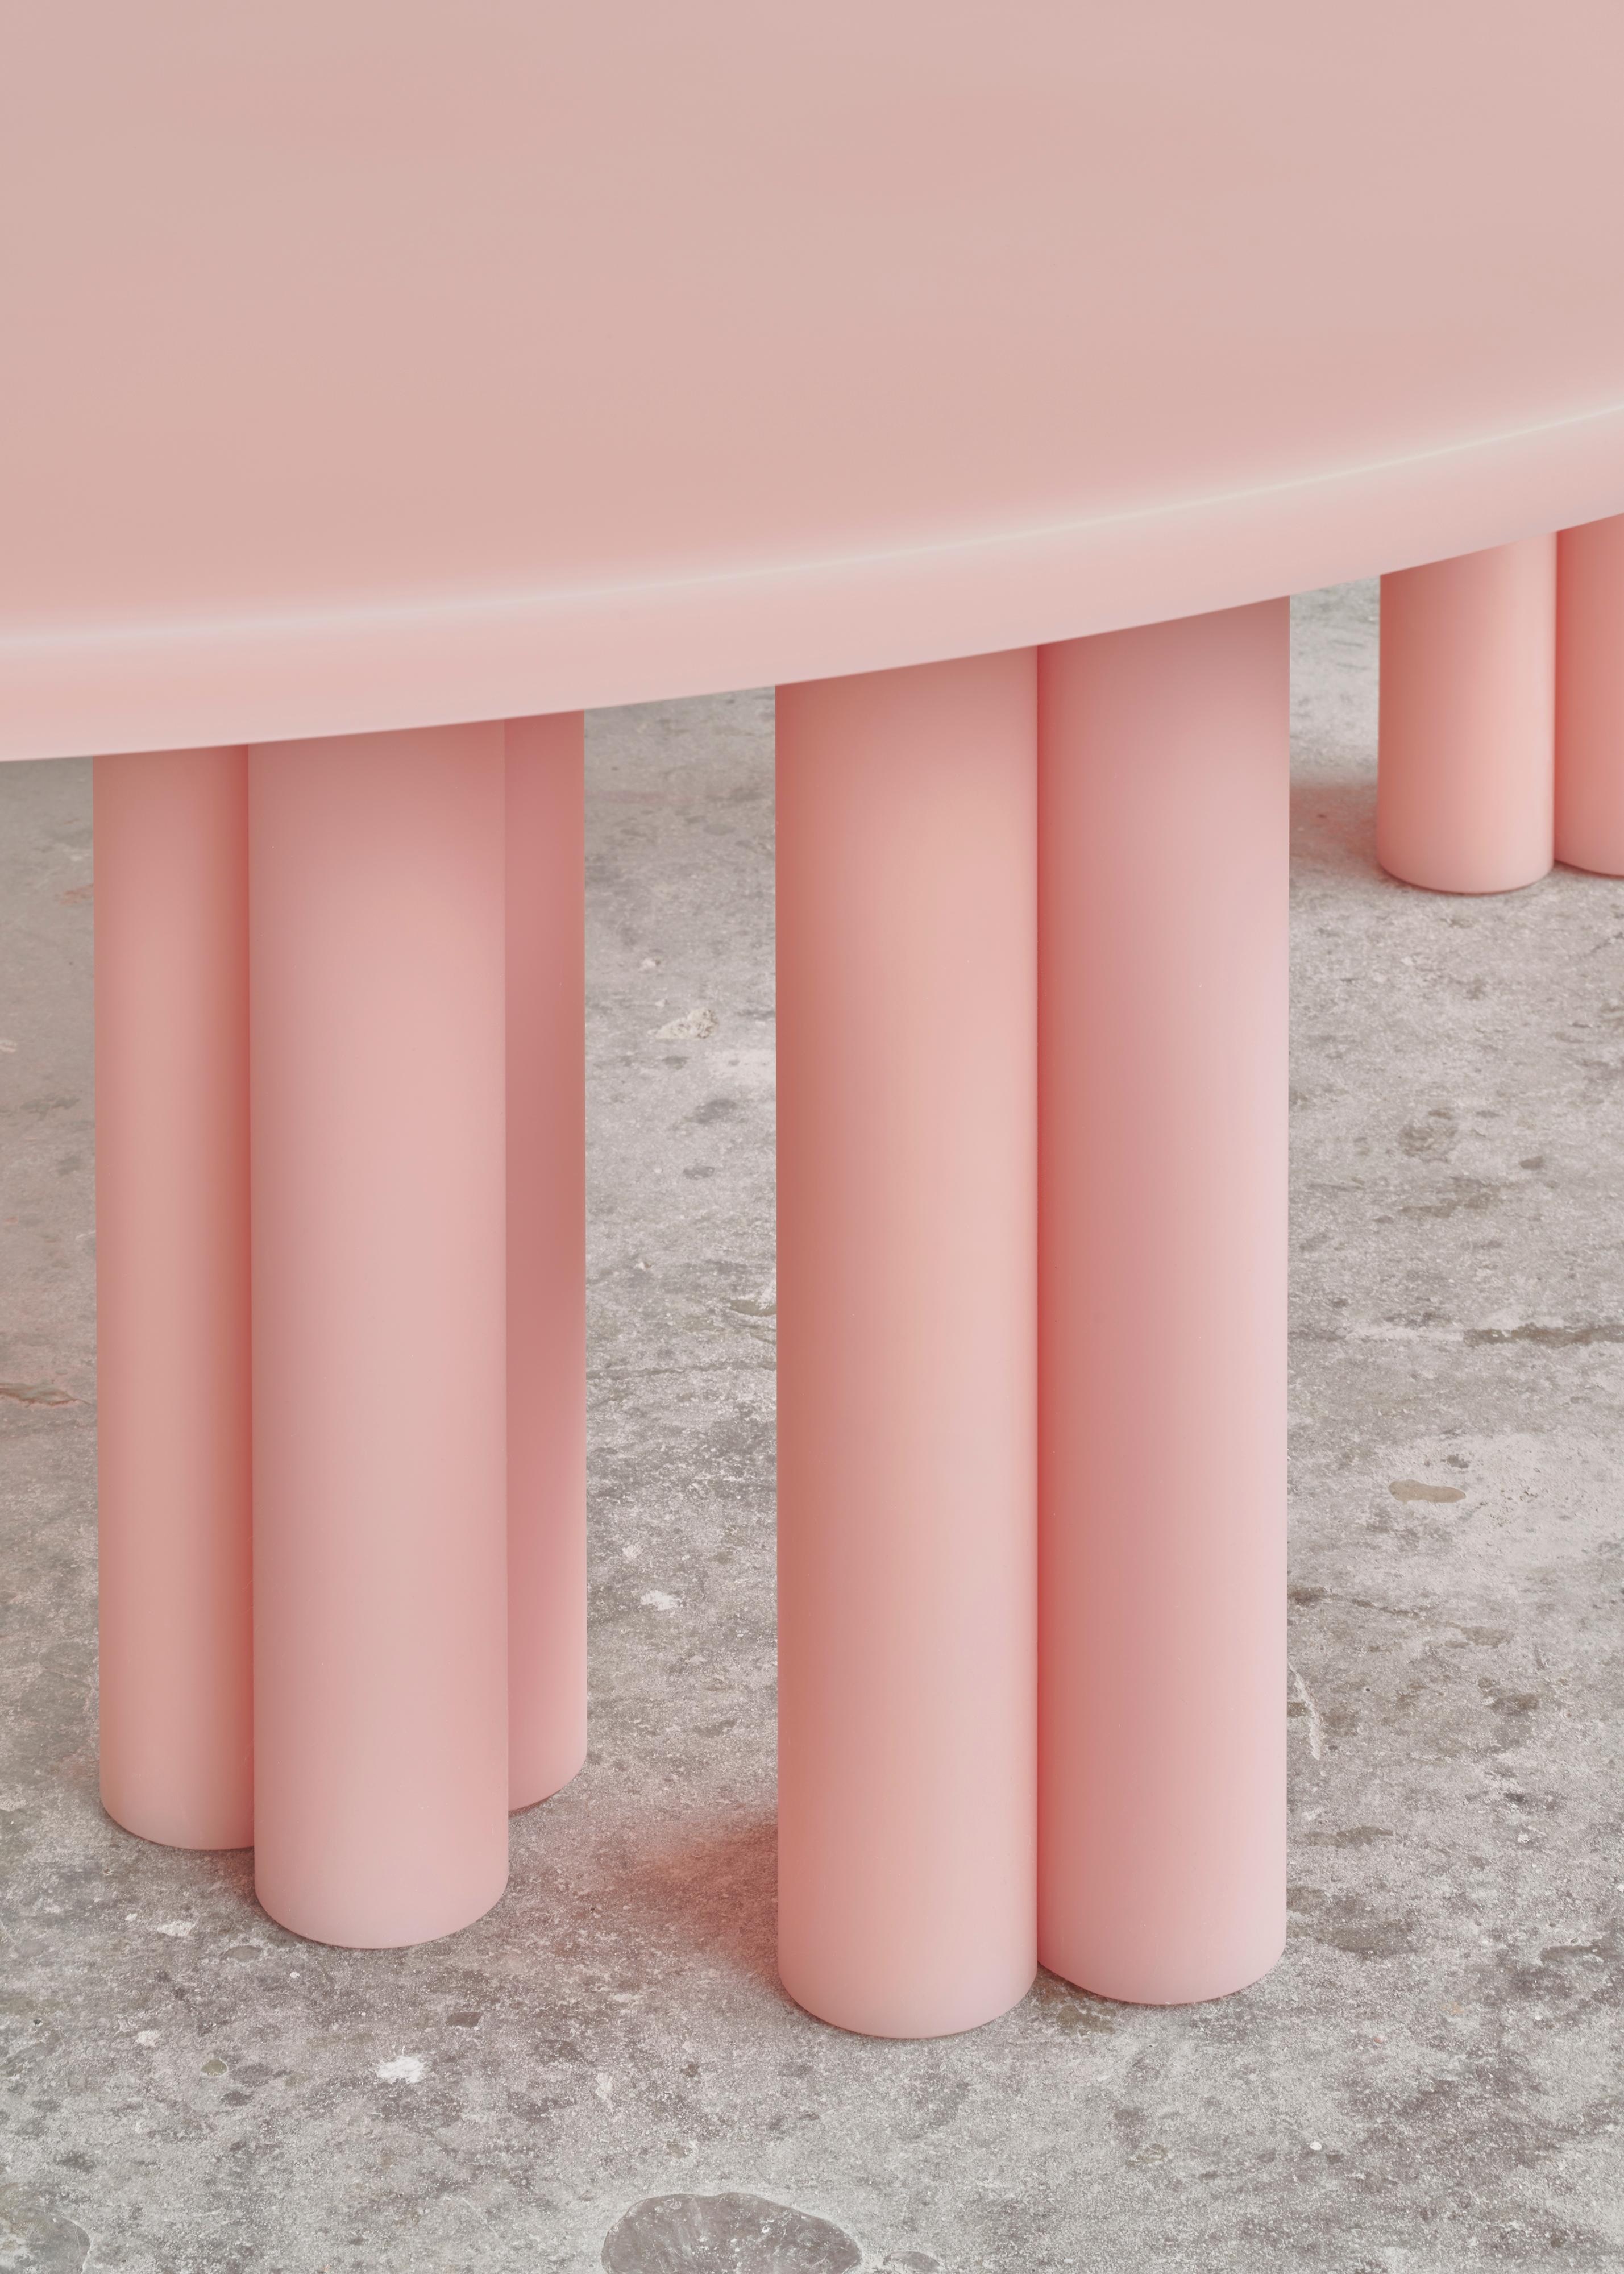 Sabine Marcelis’ SOAP Table is a dynamic dinner setting, featuring her signature resin with a soapy matte surface, now with cylinder column legs and the beautiful salmon pink colour. It is designed with the sound psychology of dining in mind. So